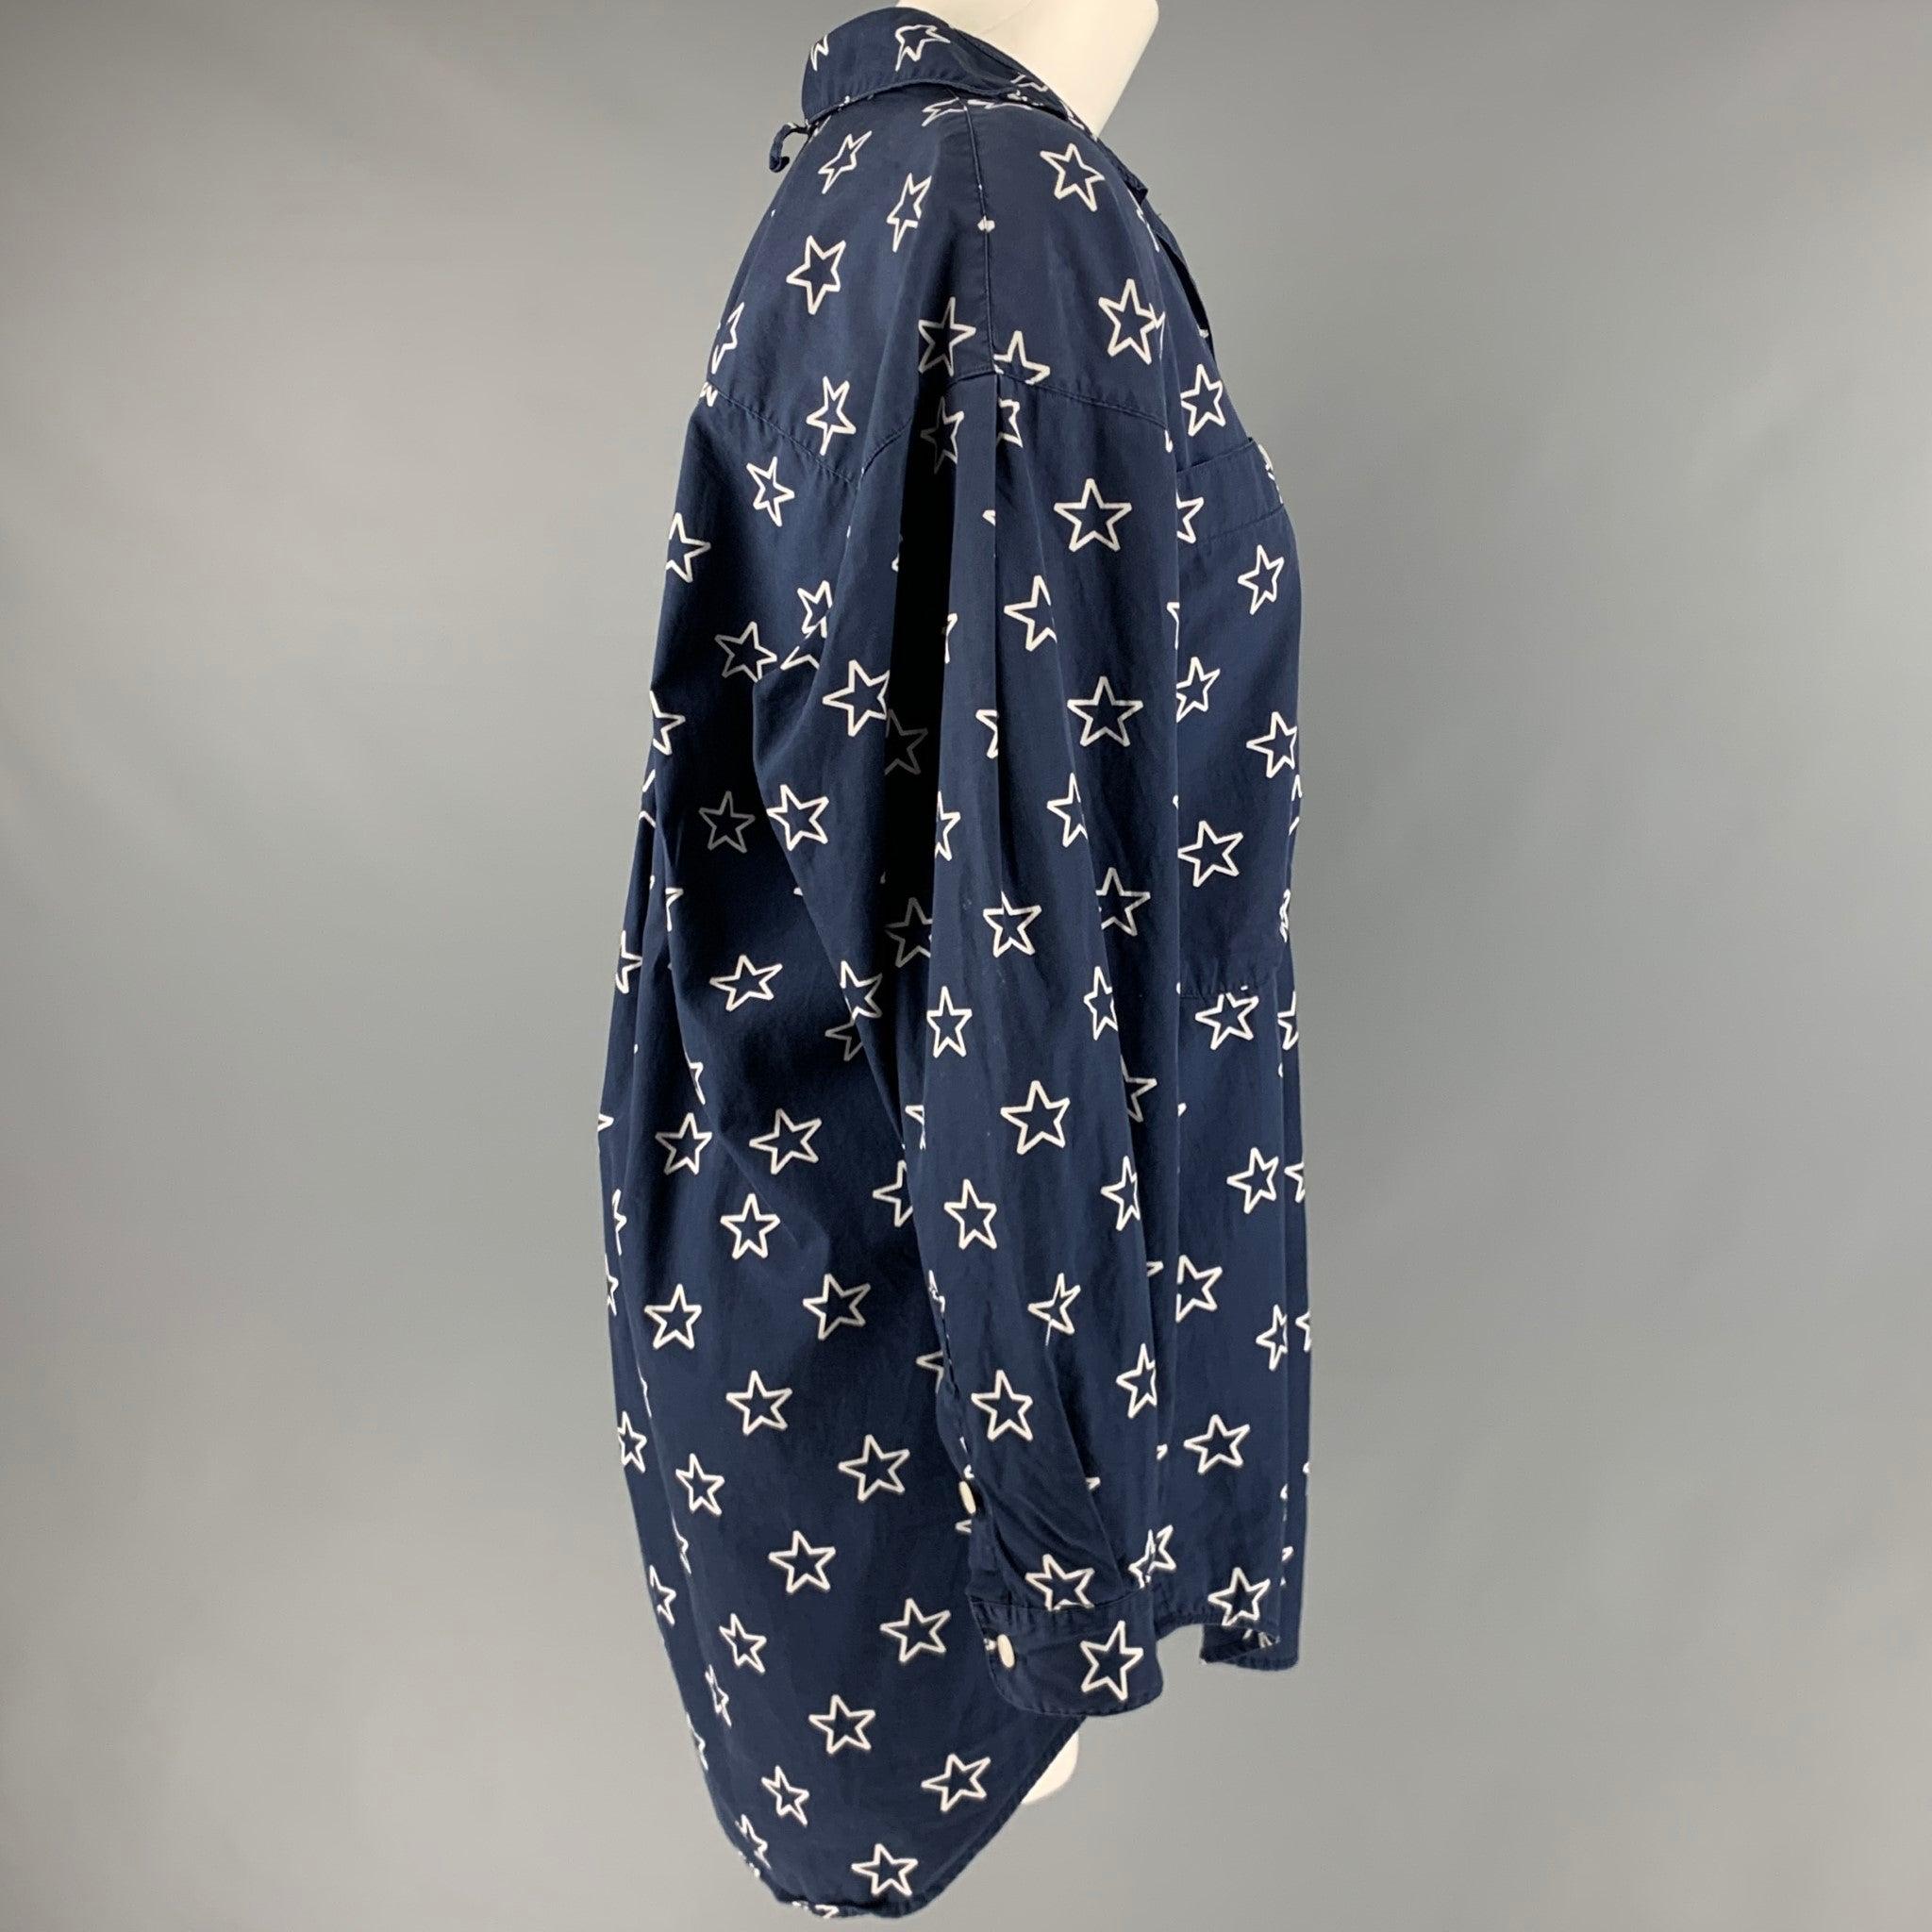 Vintage PERRY ELLIS shirt
in navy cotton fabric featuring white stars, two patch pockets, and a button closure.Excellent Pre-Owned Condition. 

Marked:   S 

Measurements: 
 
Shoulder: 20 inches  Bust: 41 inches  Sleeve: 20 inches  Length: 32 inches